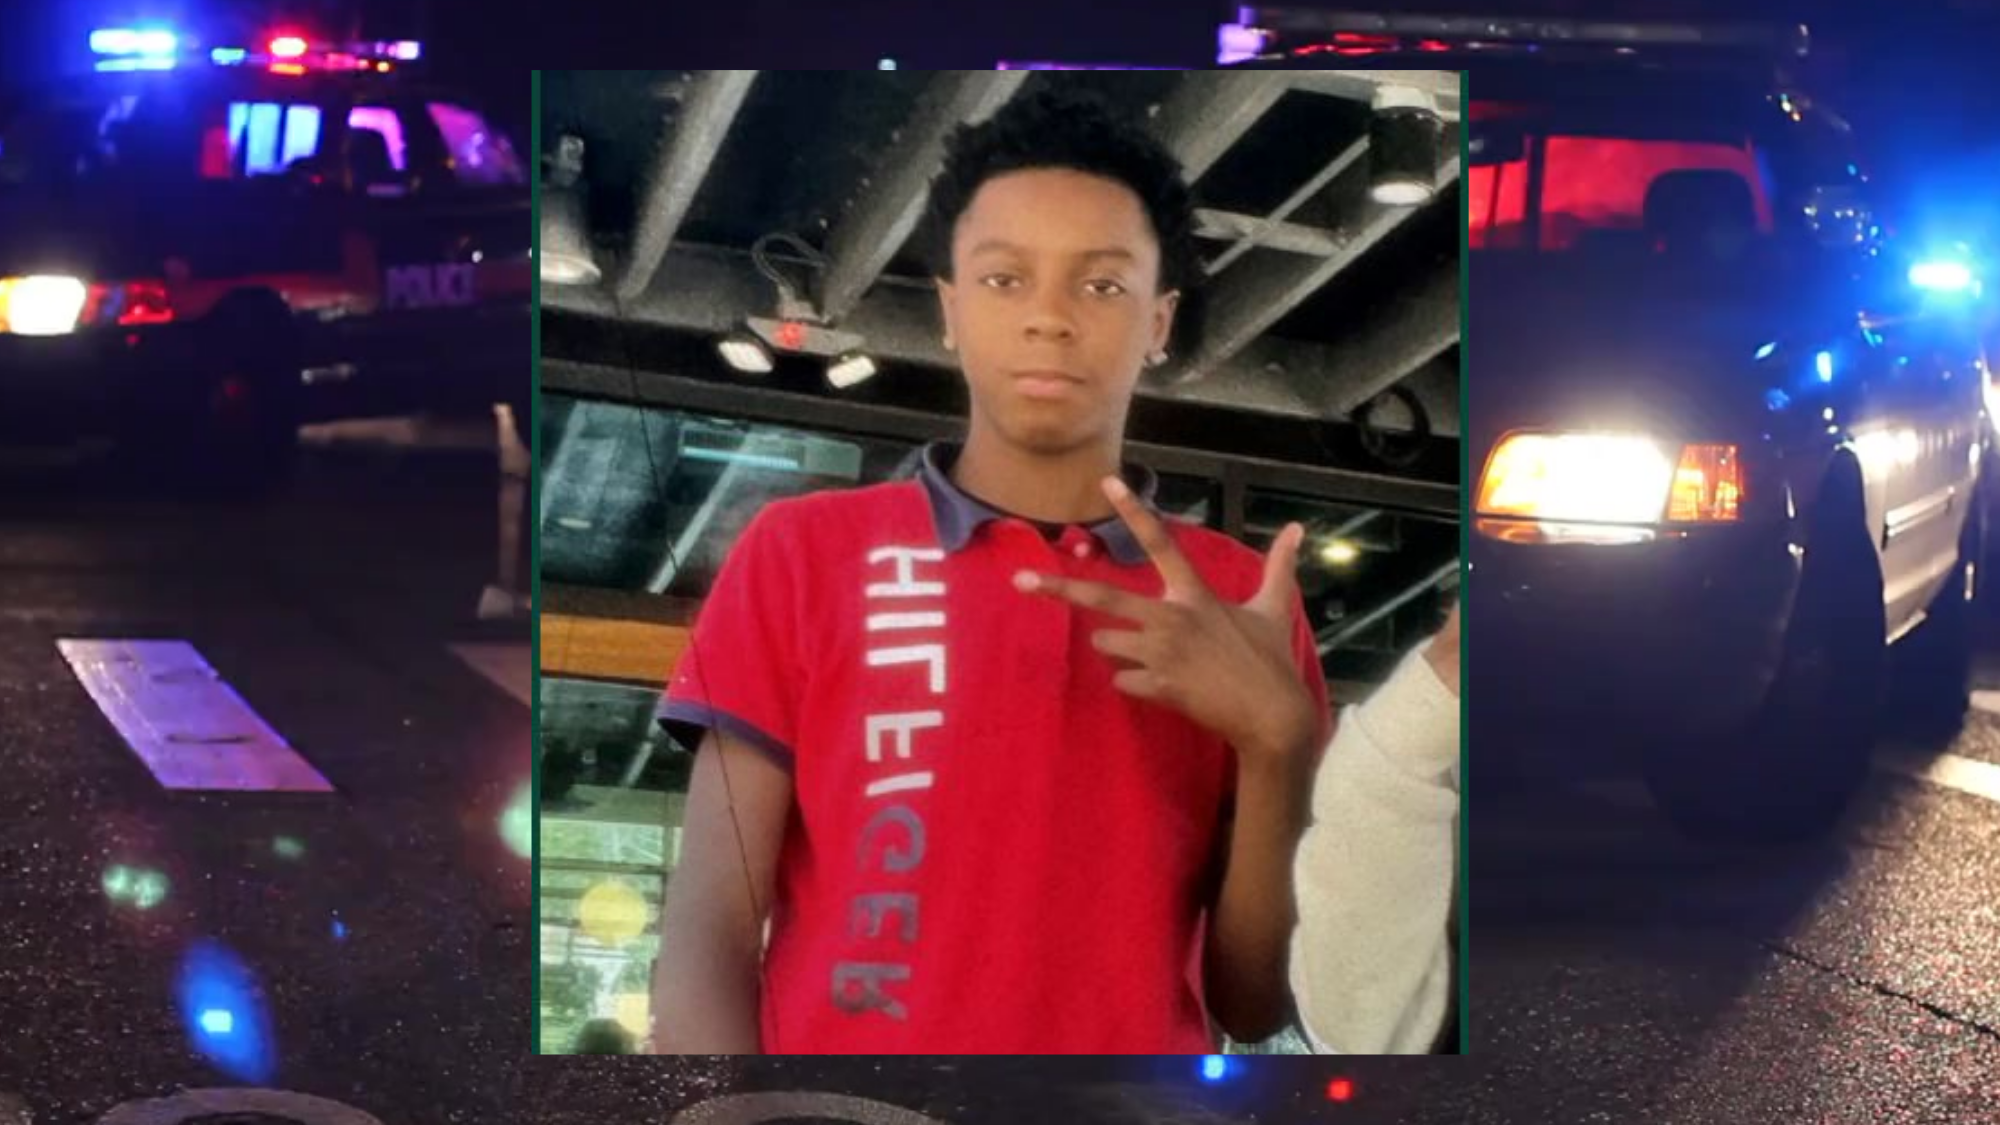 Detectives Search For Boy Missing From North Lauderdale